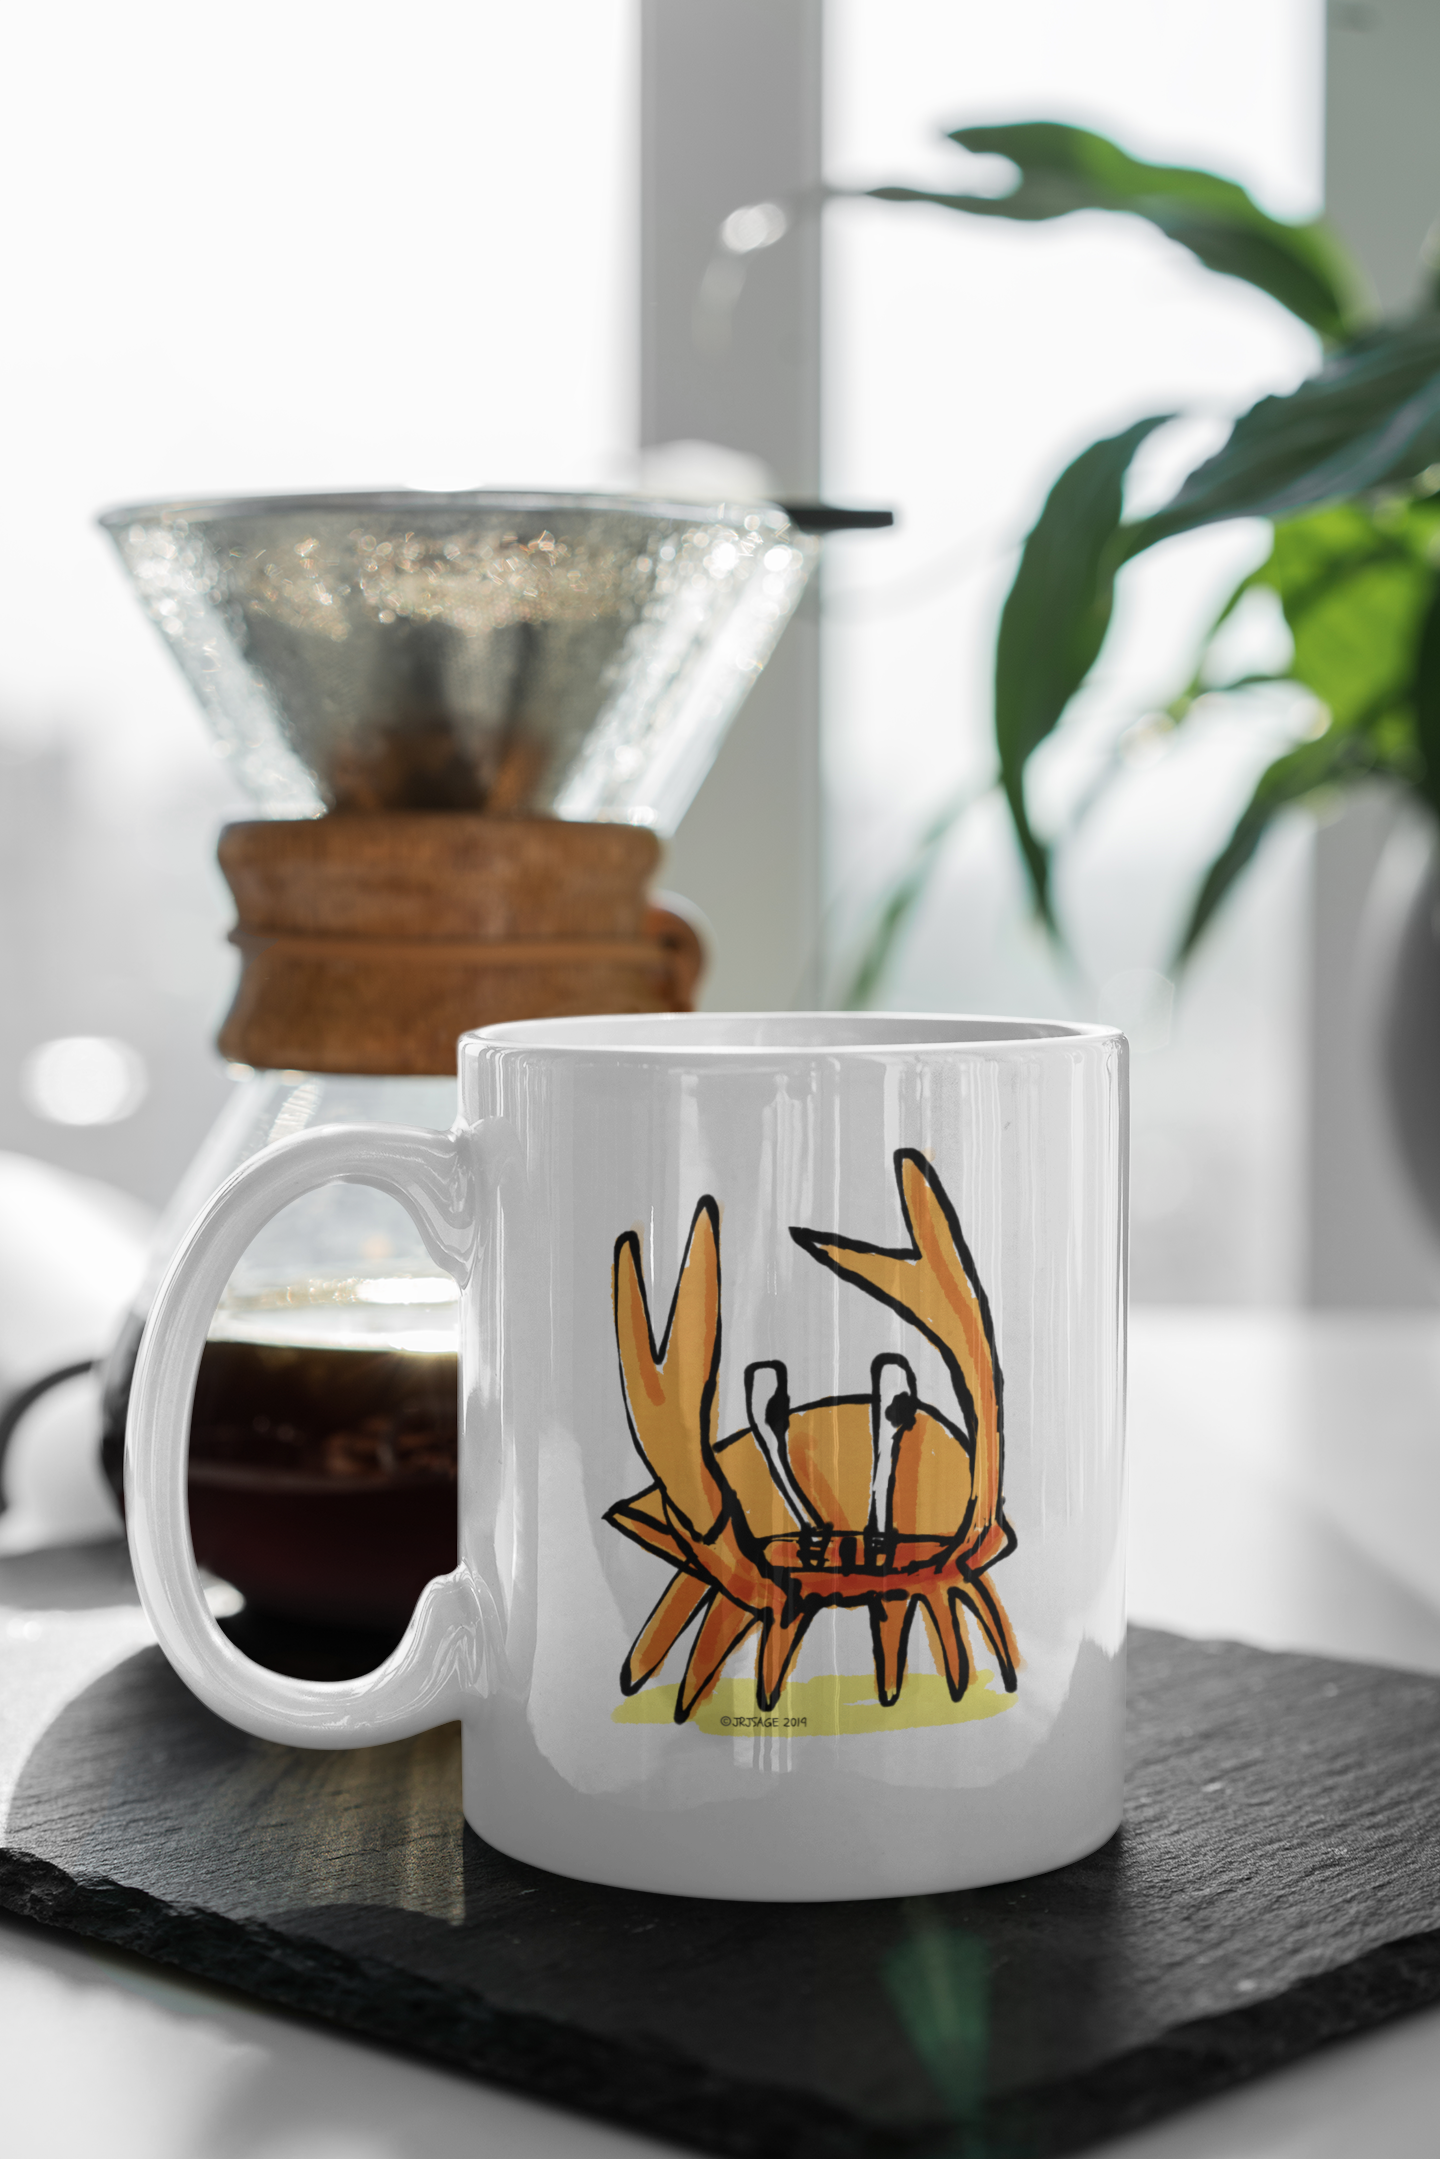 A White Ceramic Hector and Bone Mug with an illustration of a cute Angry Crab on a table